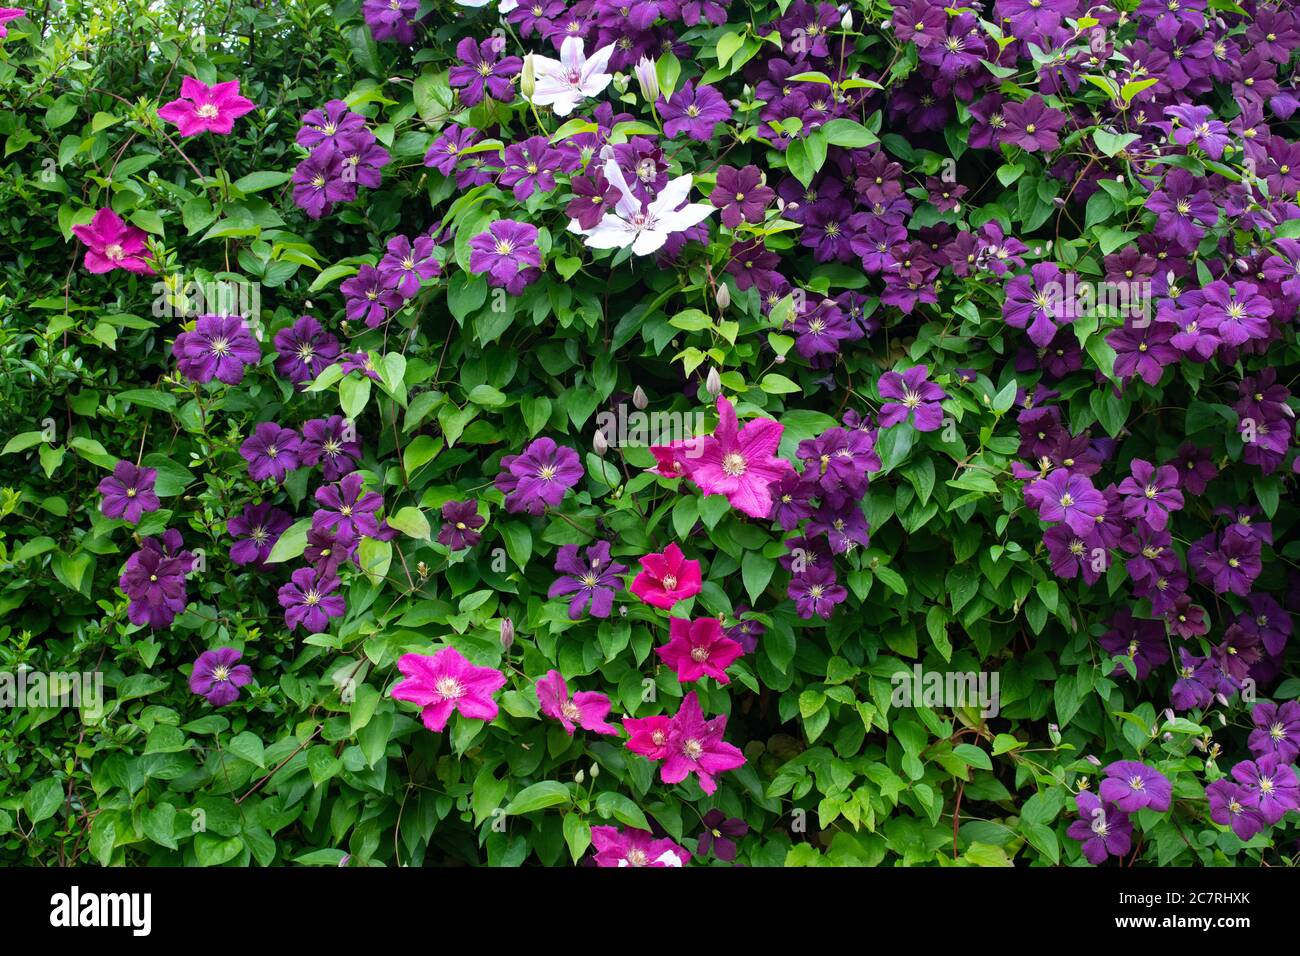 Pink and purple clematis including clematis etoile violette in UK garden Stock Photo